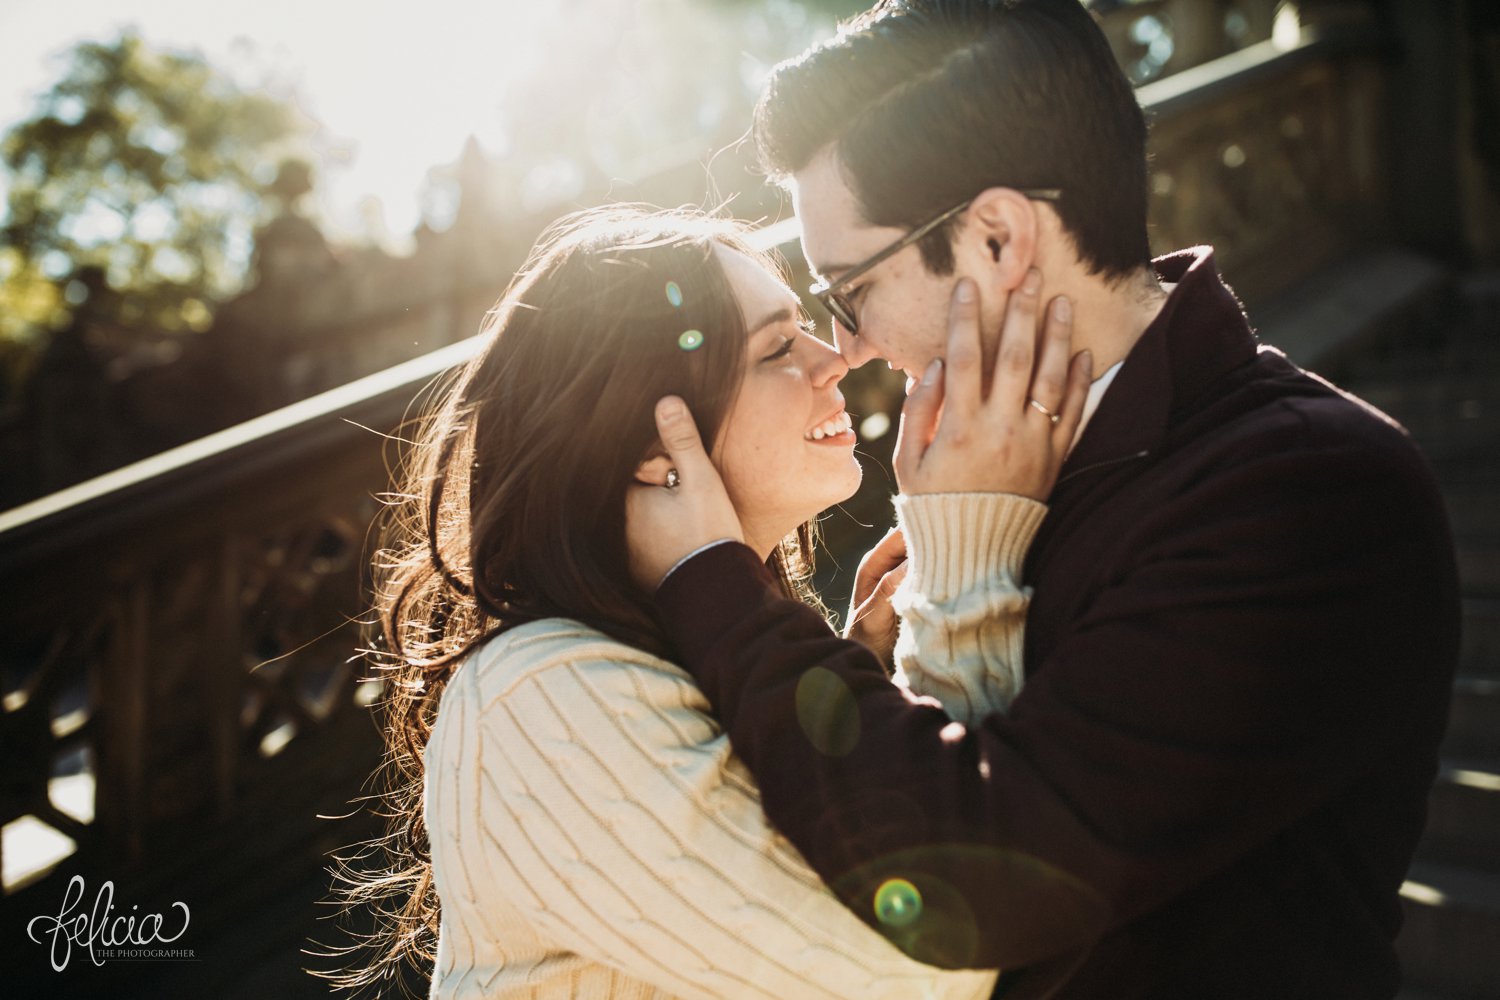 images by feliciathephotographer.com | destination wedding photographer | engagement | new york city | central park | downtown | urban | casual | classic | romantic | preppy | autumn | fall leaves | diamond ring | cuddles | natural lighting | 